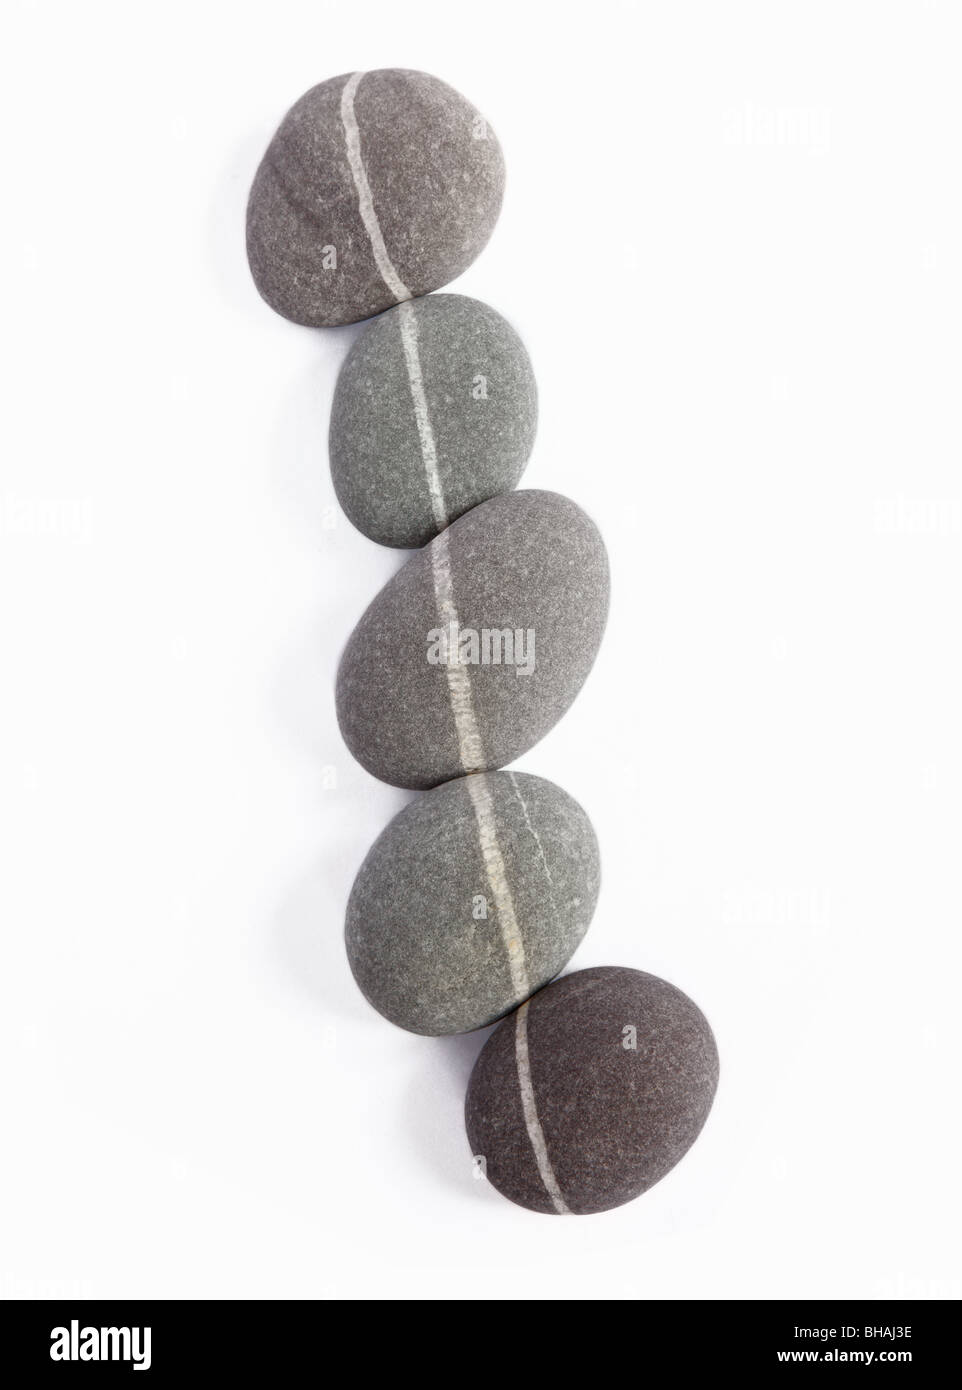 Five granite pebbles, each with one quartz vein, lined up so that the quartz veins create one continuous line. Stock Photo